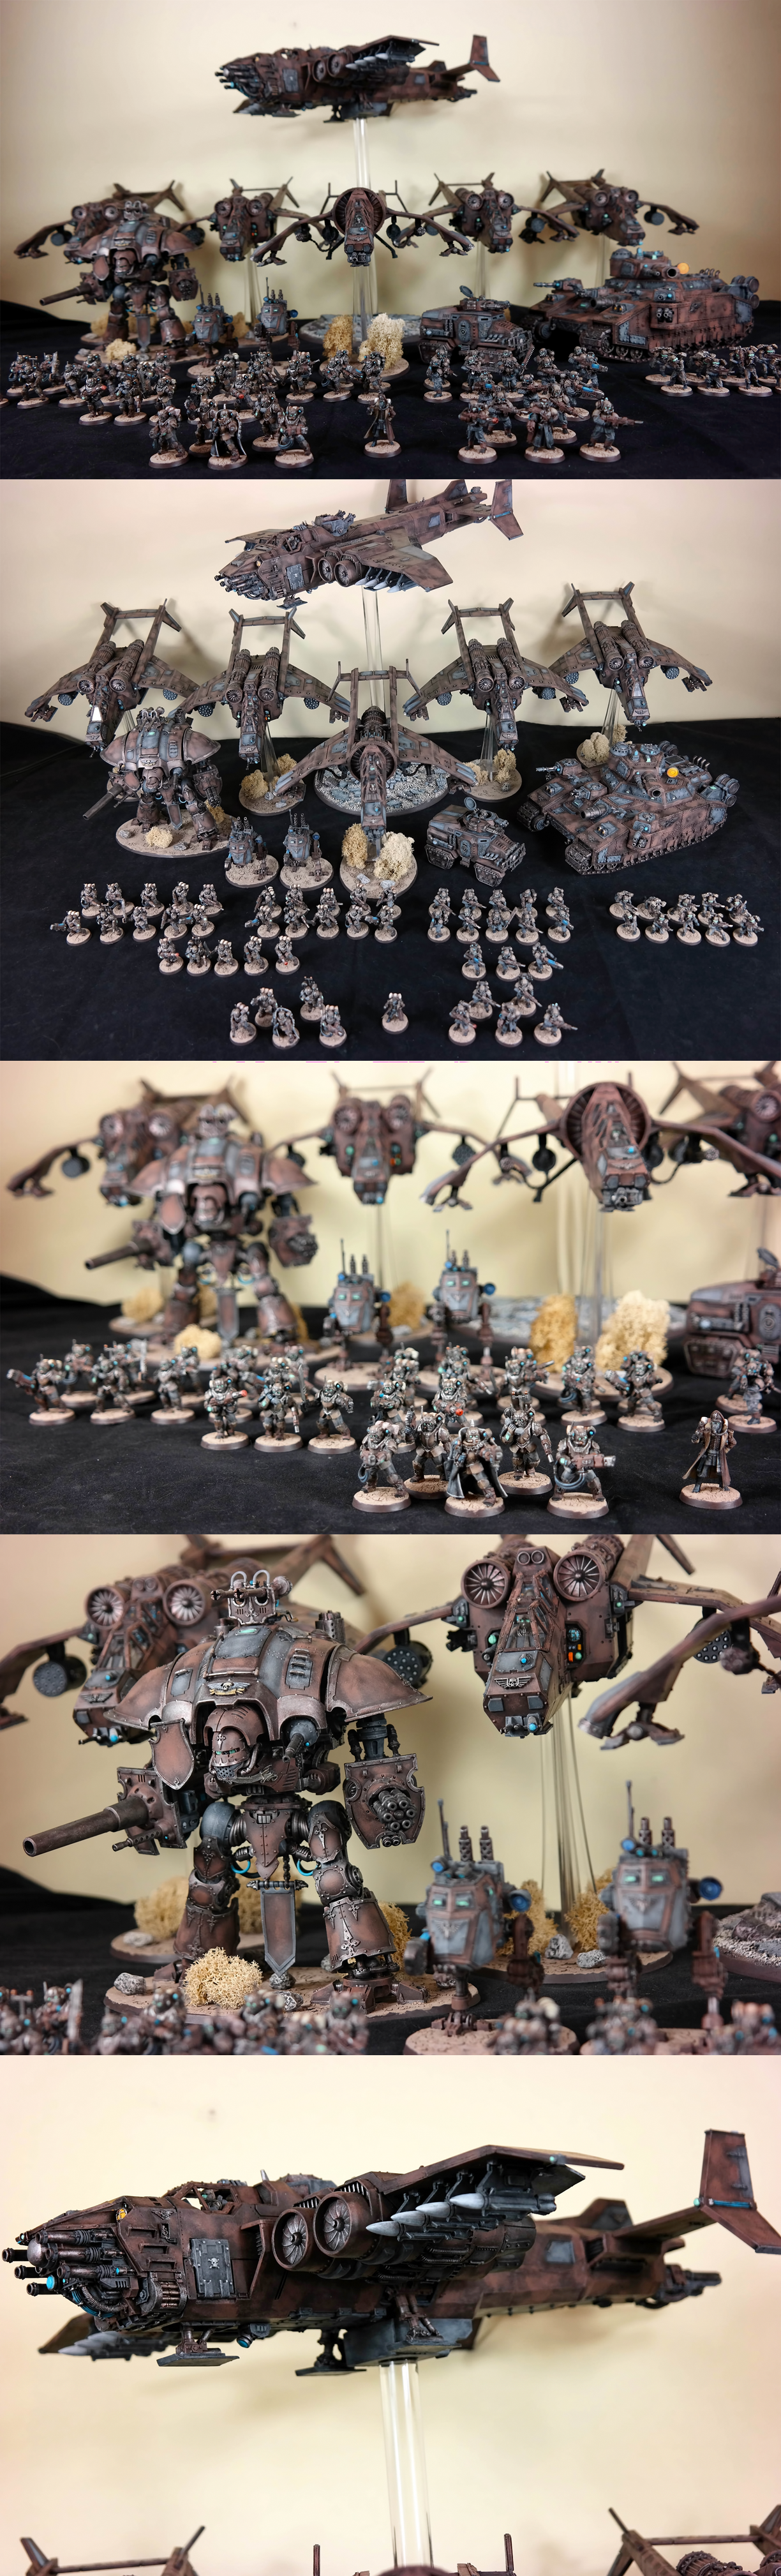 Air Cavalry, Army, Astra Militarum, Bomber, Elysian, Elysians, Hellhammer, Imperial Guard, Imperial Knight, Imperial Navy, Lions Of Leander Vi, Militarum Tempestus, Scions, Taurox Prime, Valkyrie, Vulture